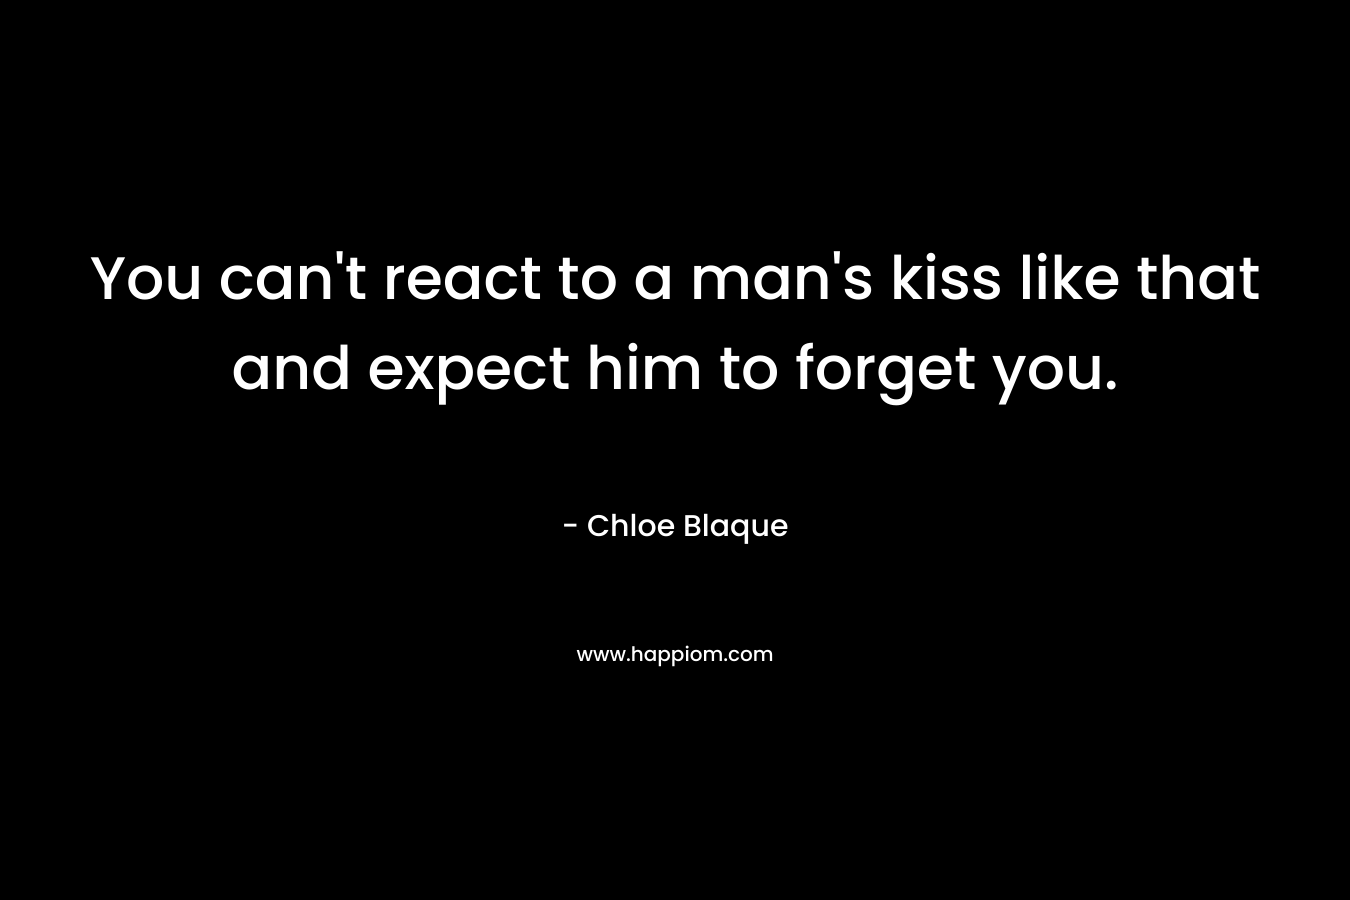 You can’t react to a man’s kiss like that and expect him to forget you. – Chloe Blaque